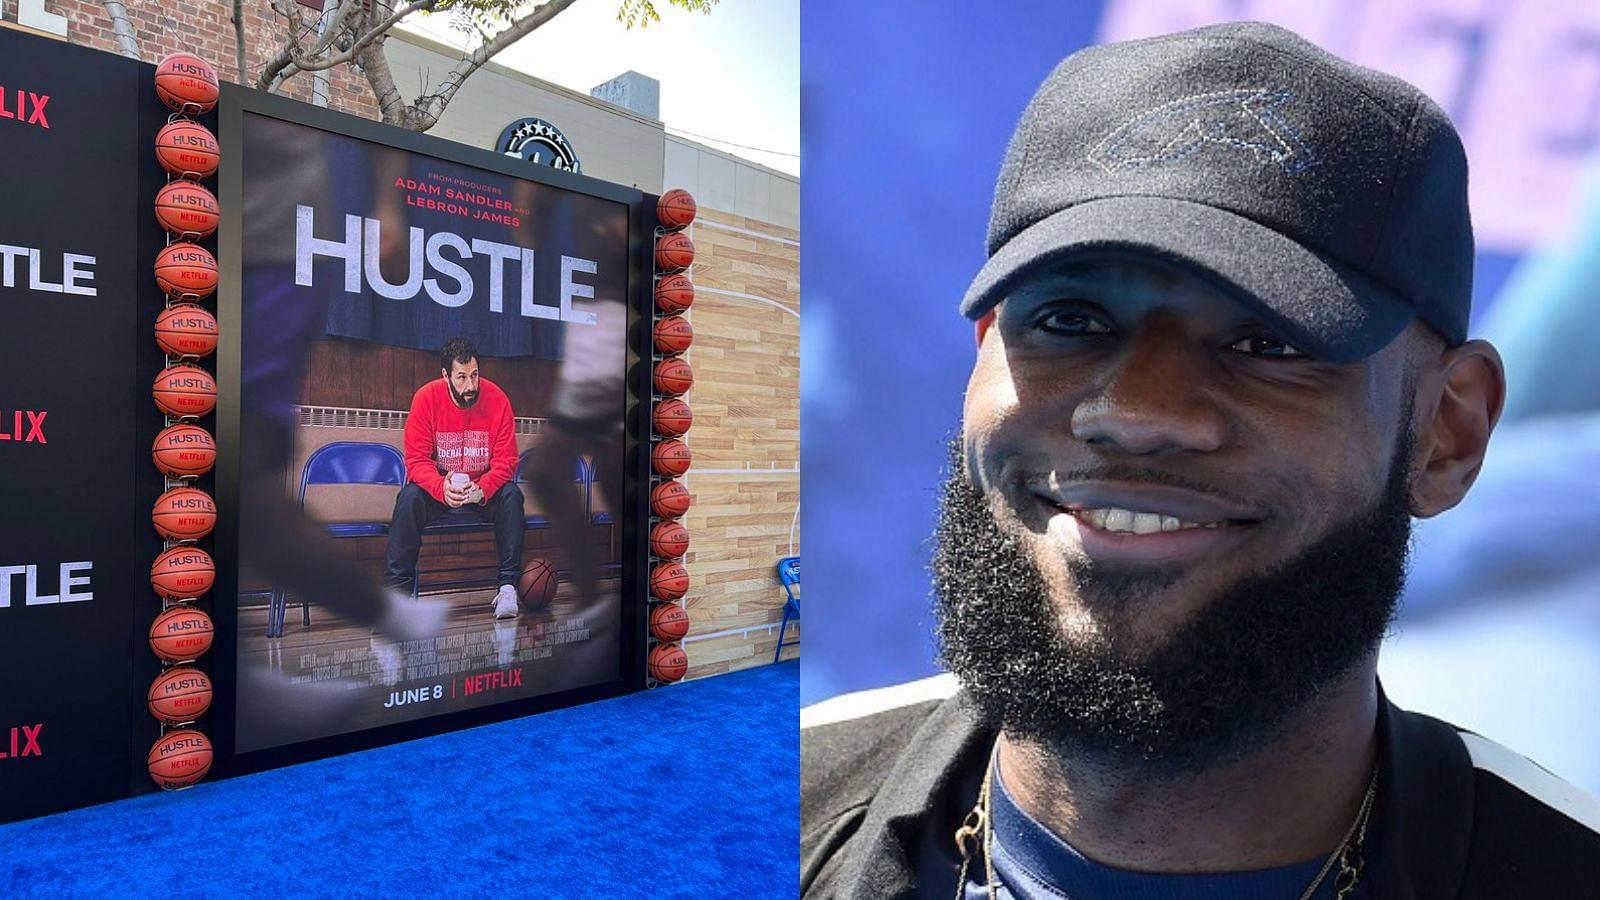 "LeBron James you rocking with Adam Sandler? Stephen Curry is chasing Michael Jordan's 6 rings": Fans remind Lakers star that he was 'The Chosen One' at Hustle premiere